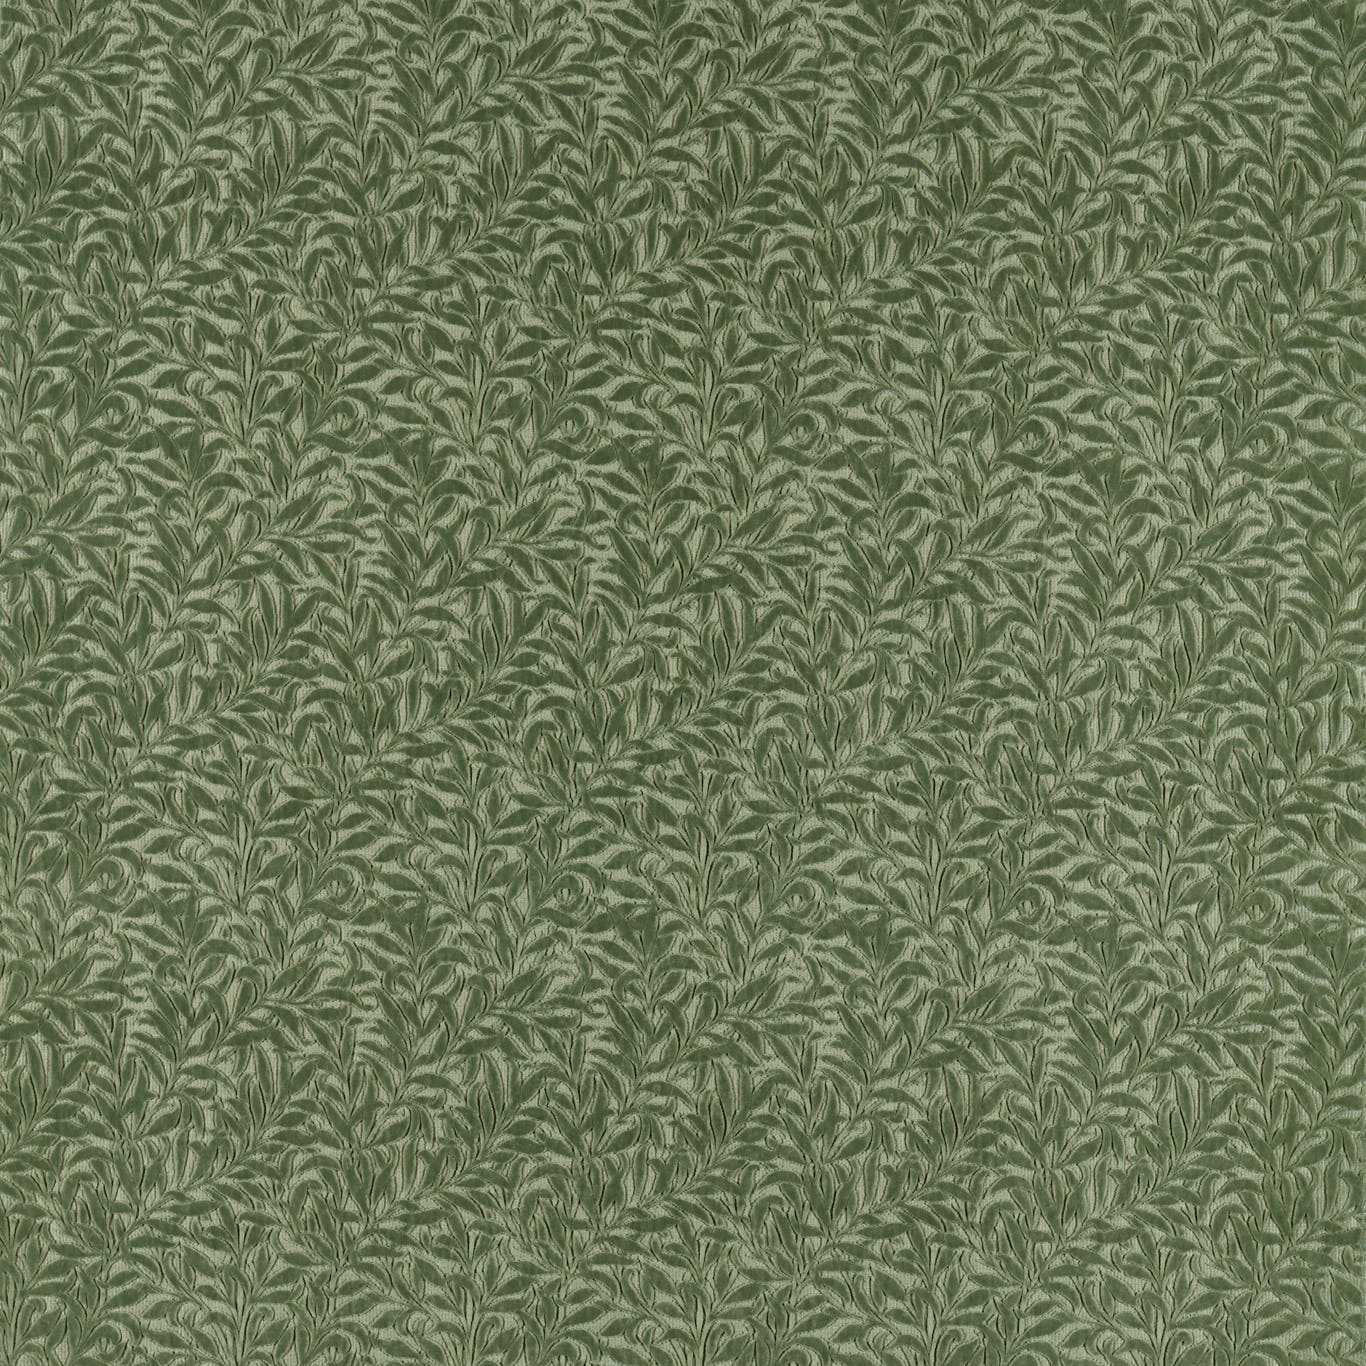 Willow Boughs Caffoy Velvet Standen Clay Fabric by MOR